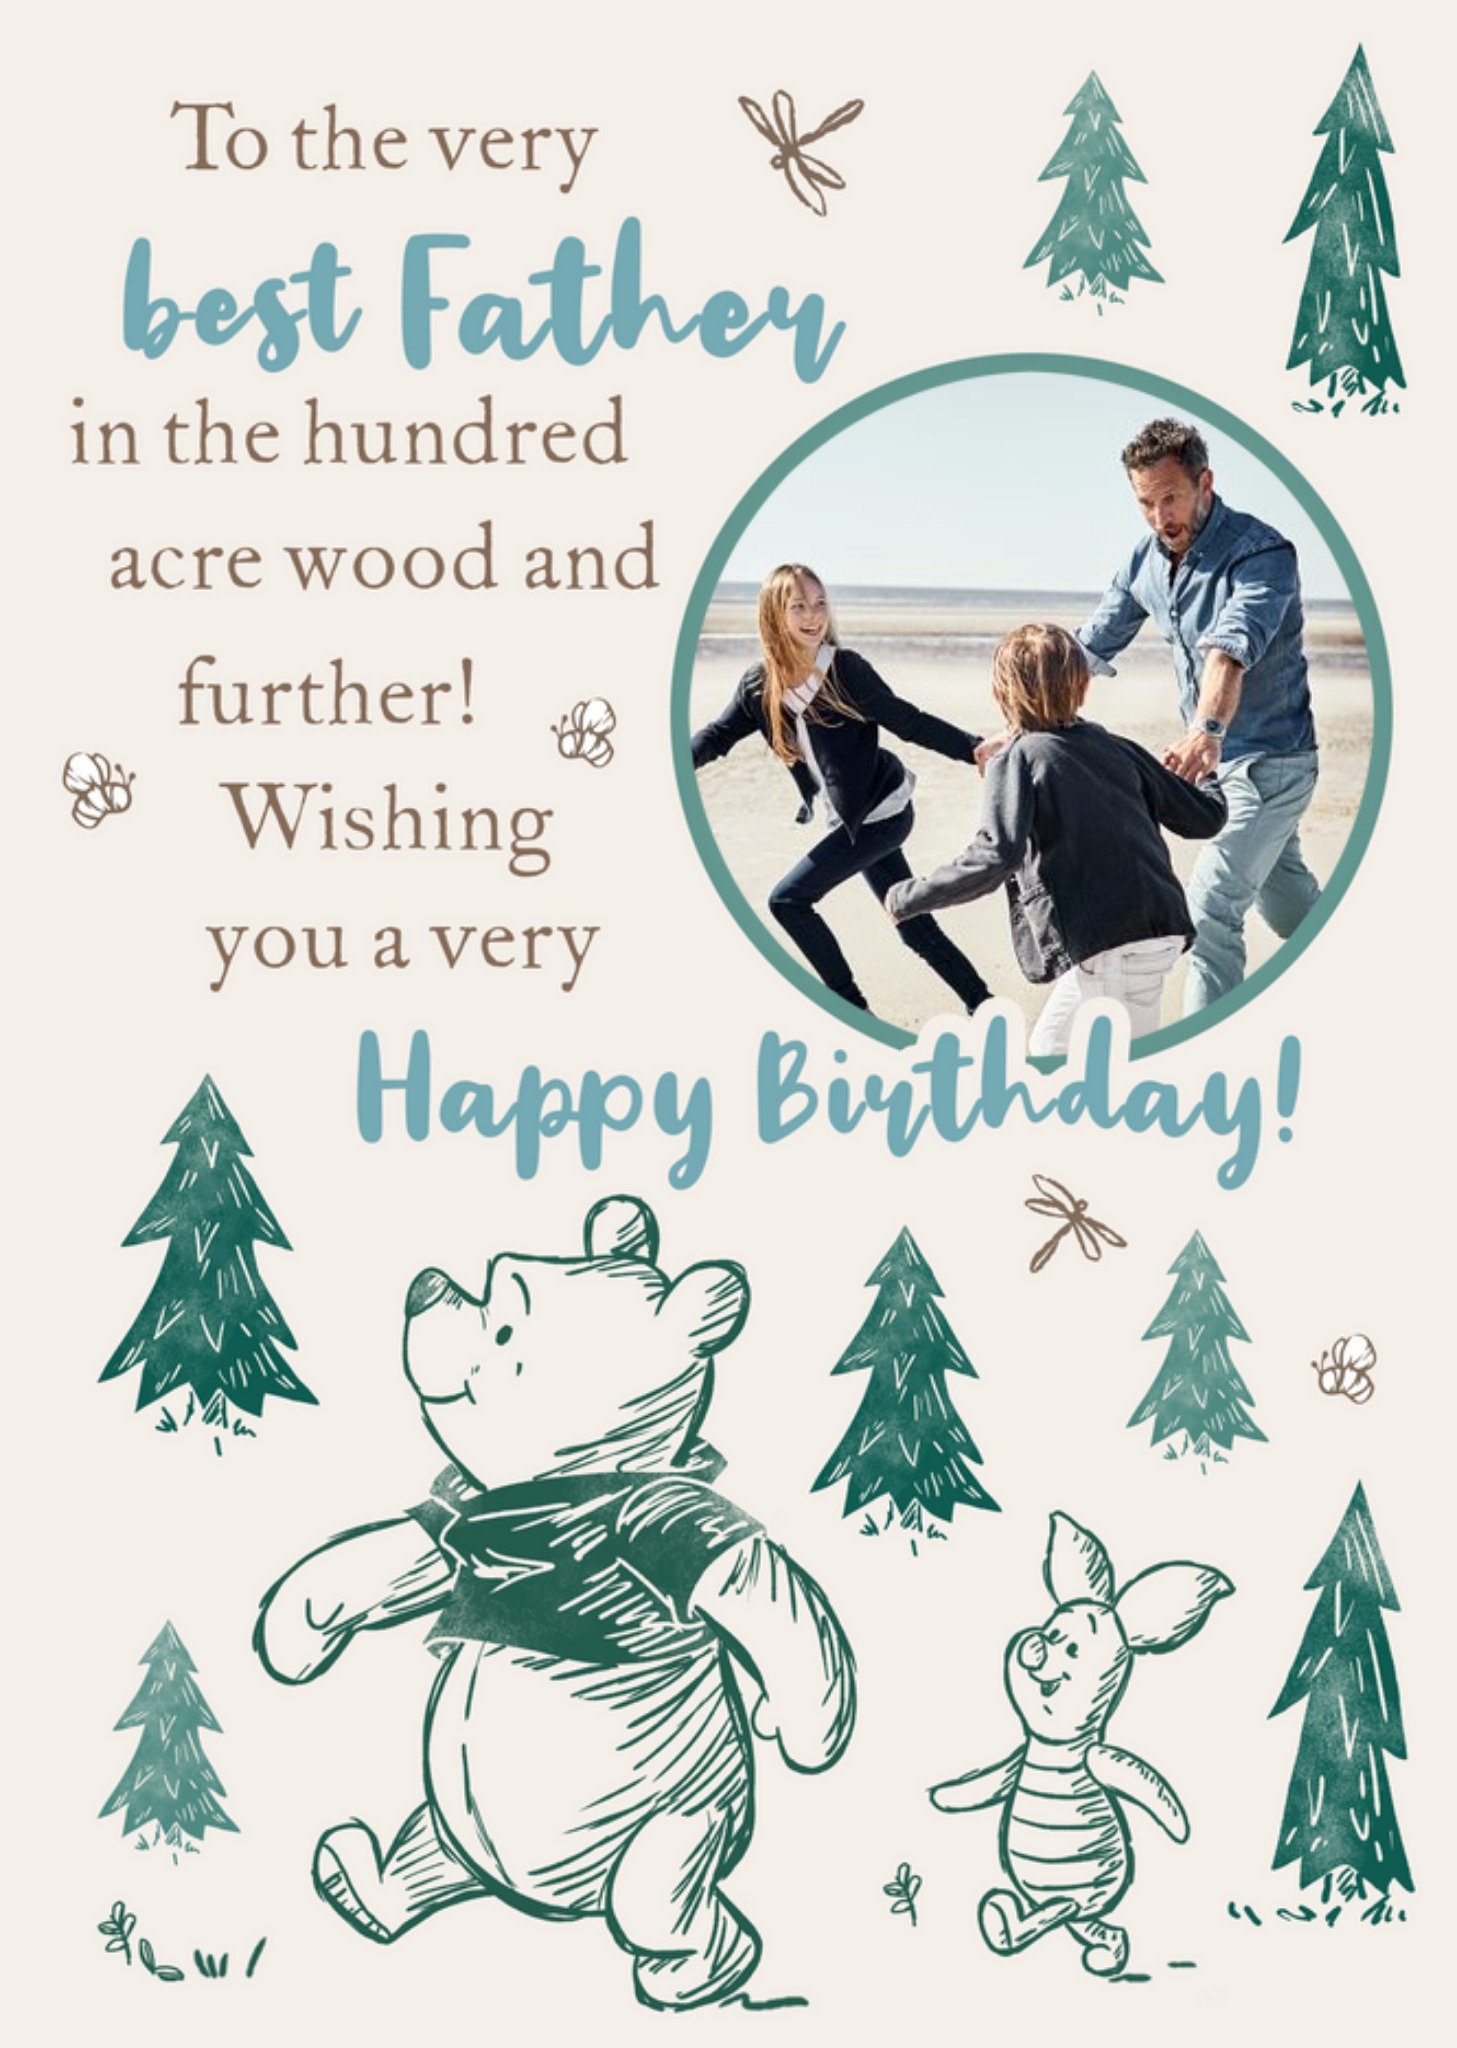 Disney Winnie The Pooh The Very Best Father Photo Upload Birthday Card, Large